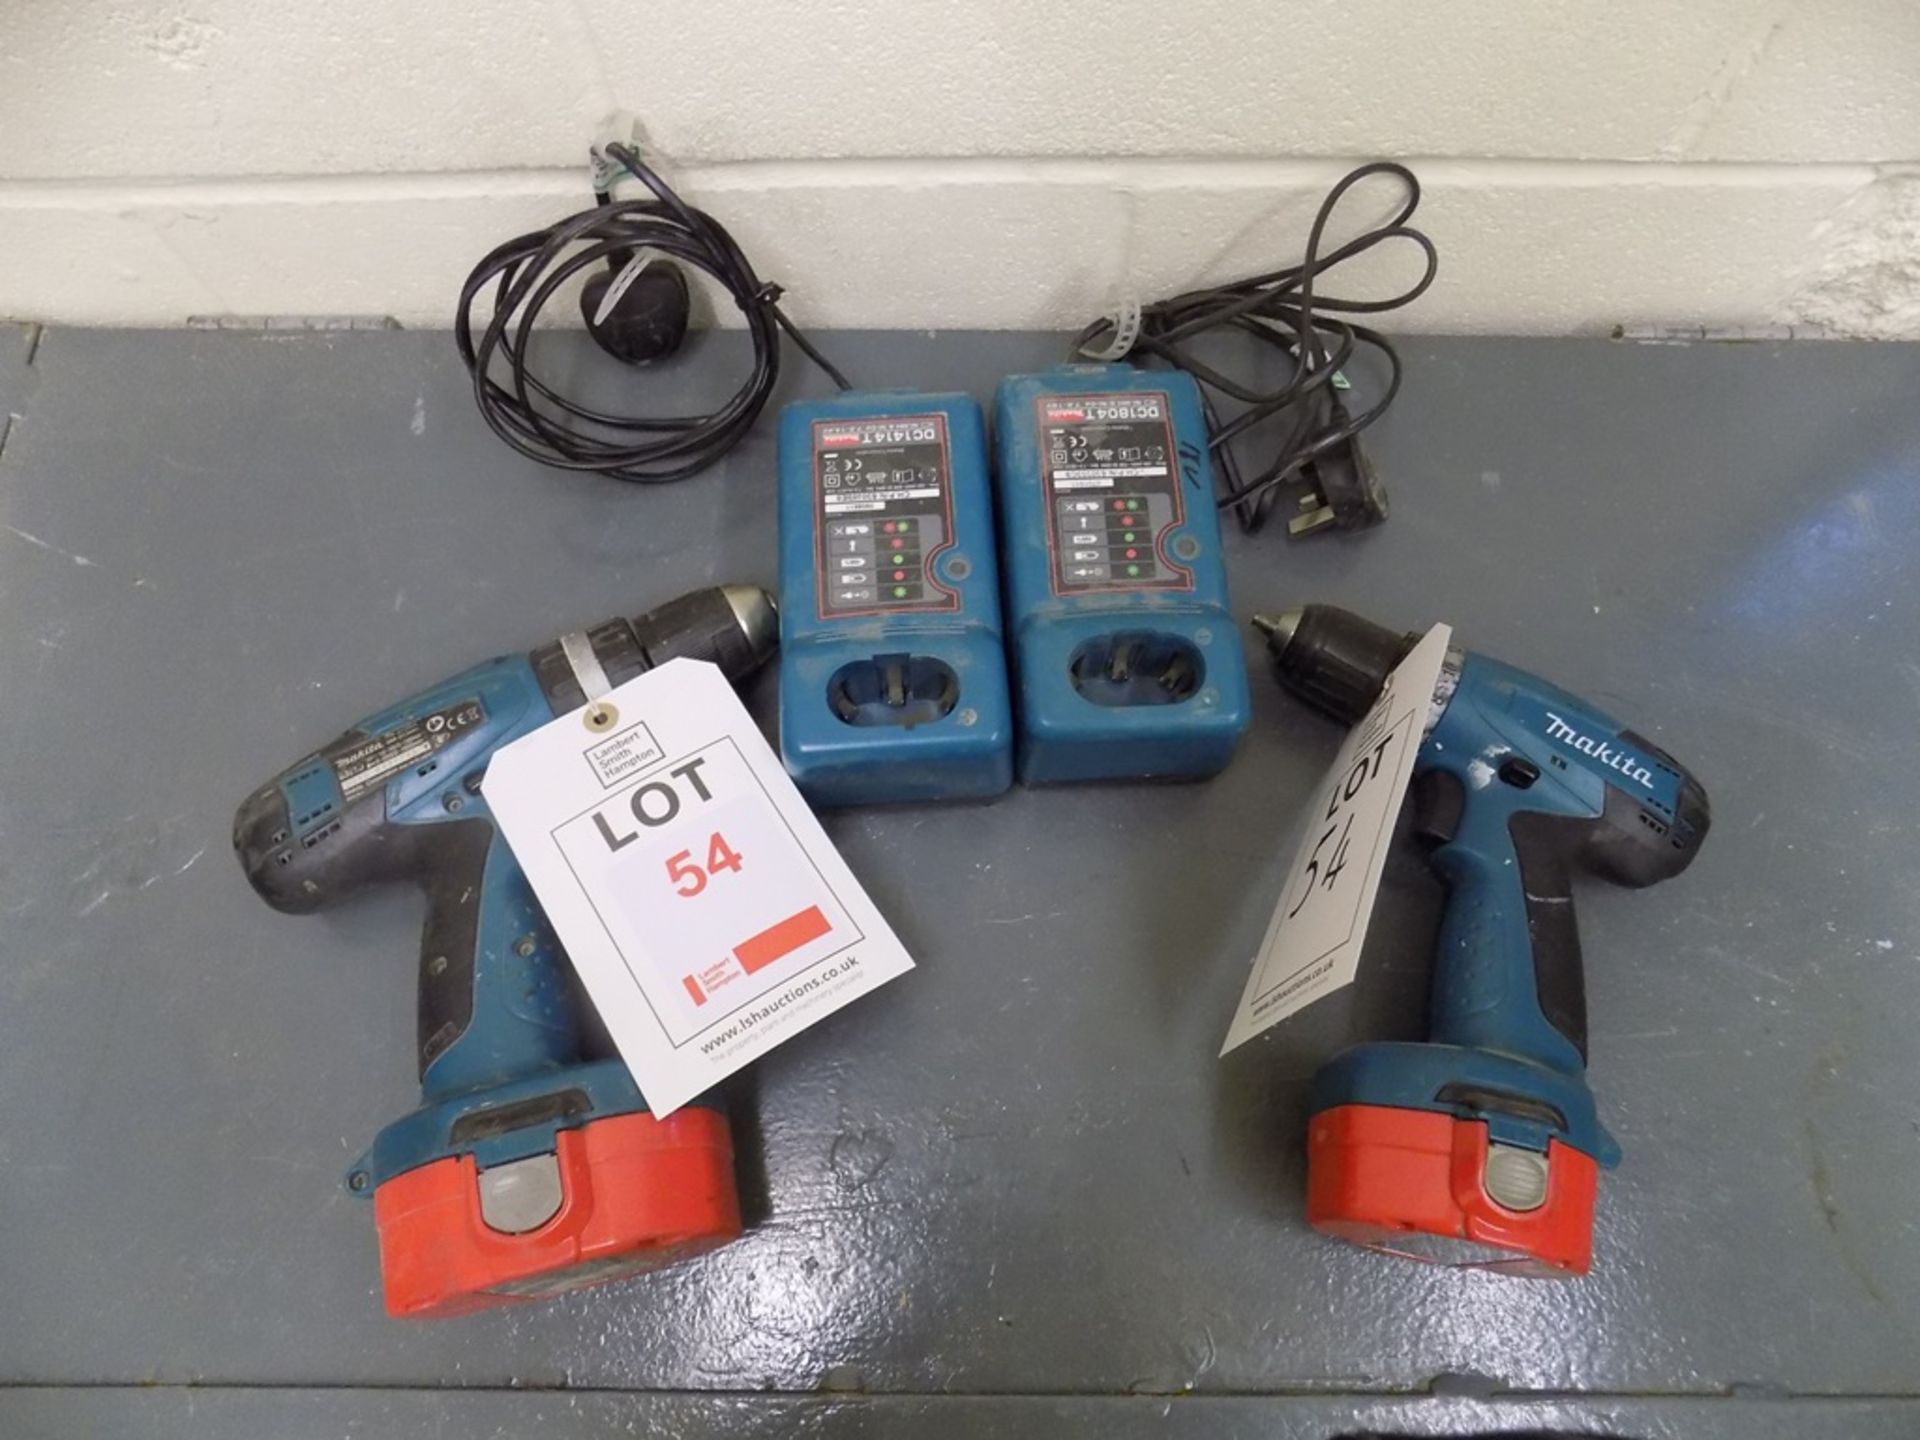 2 Makita cordless drills, each with charger